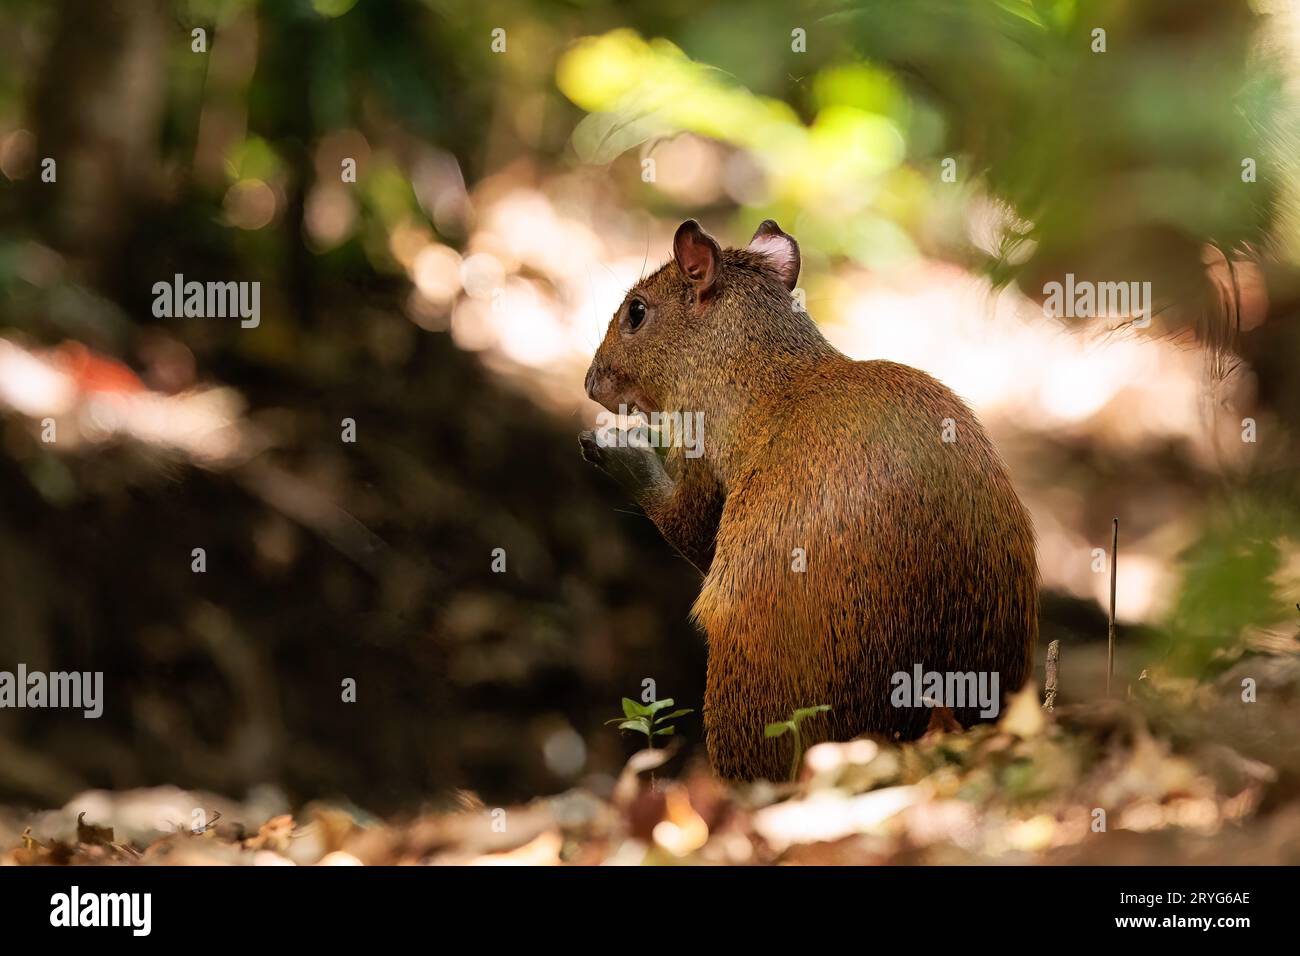 Agouti close-up through the leaves in Curi Cancha reserve, Costa Rica Stock Photo